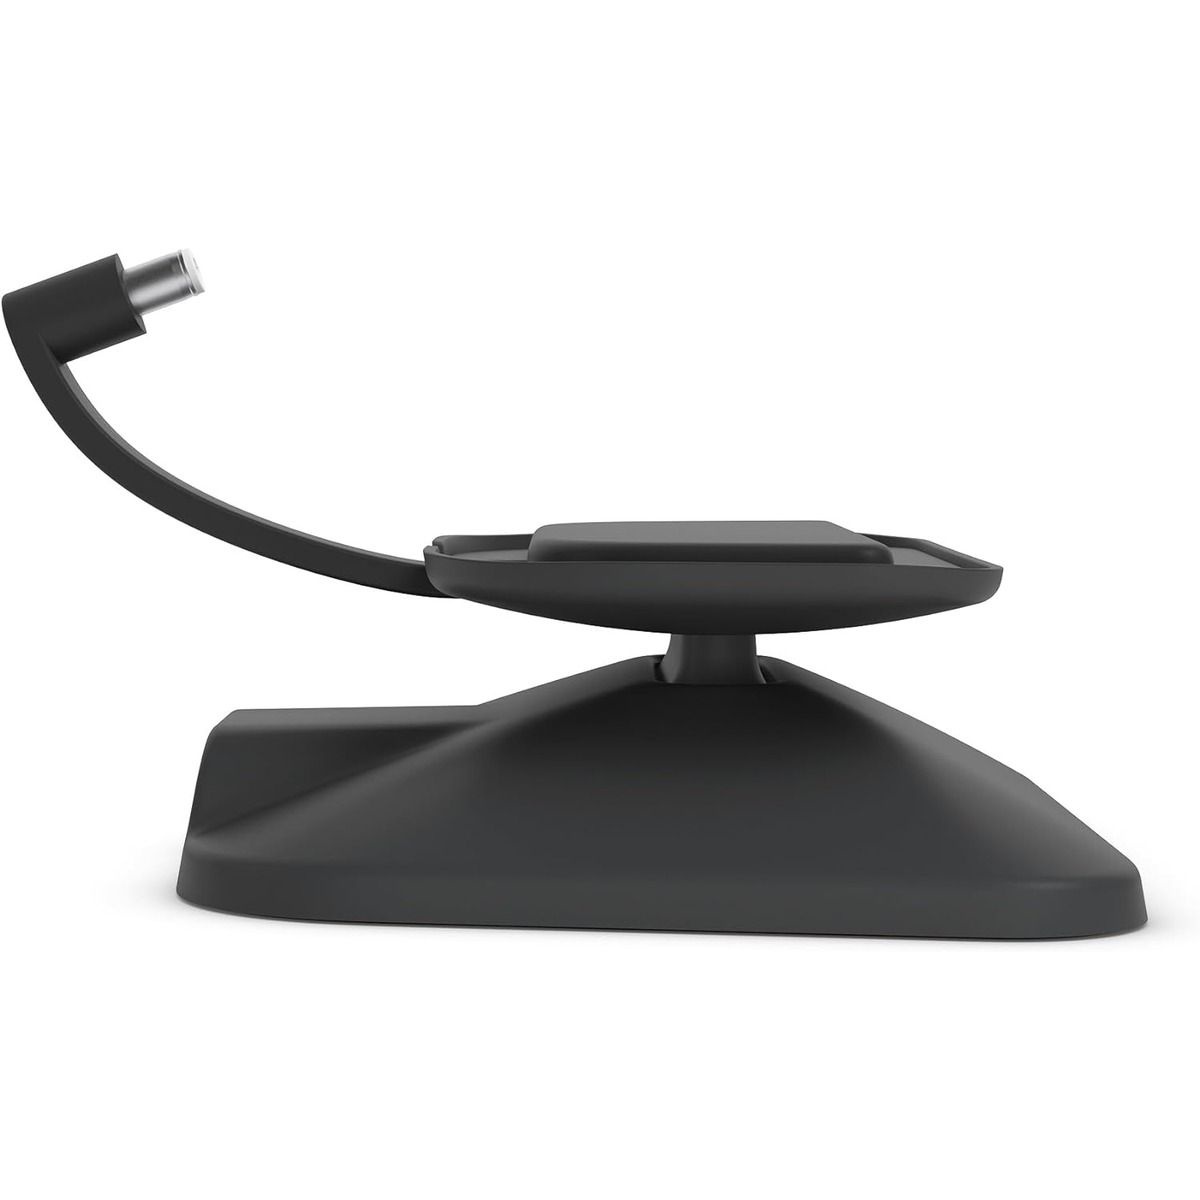 The Amazon Tilt Stand for Echo Show 8 against a white background